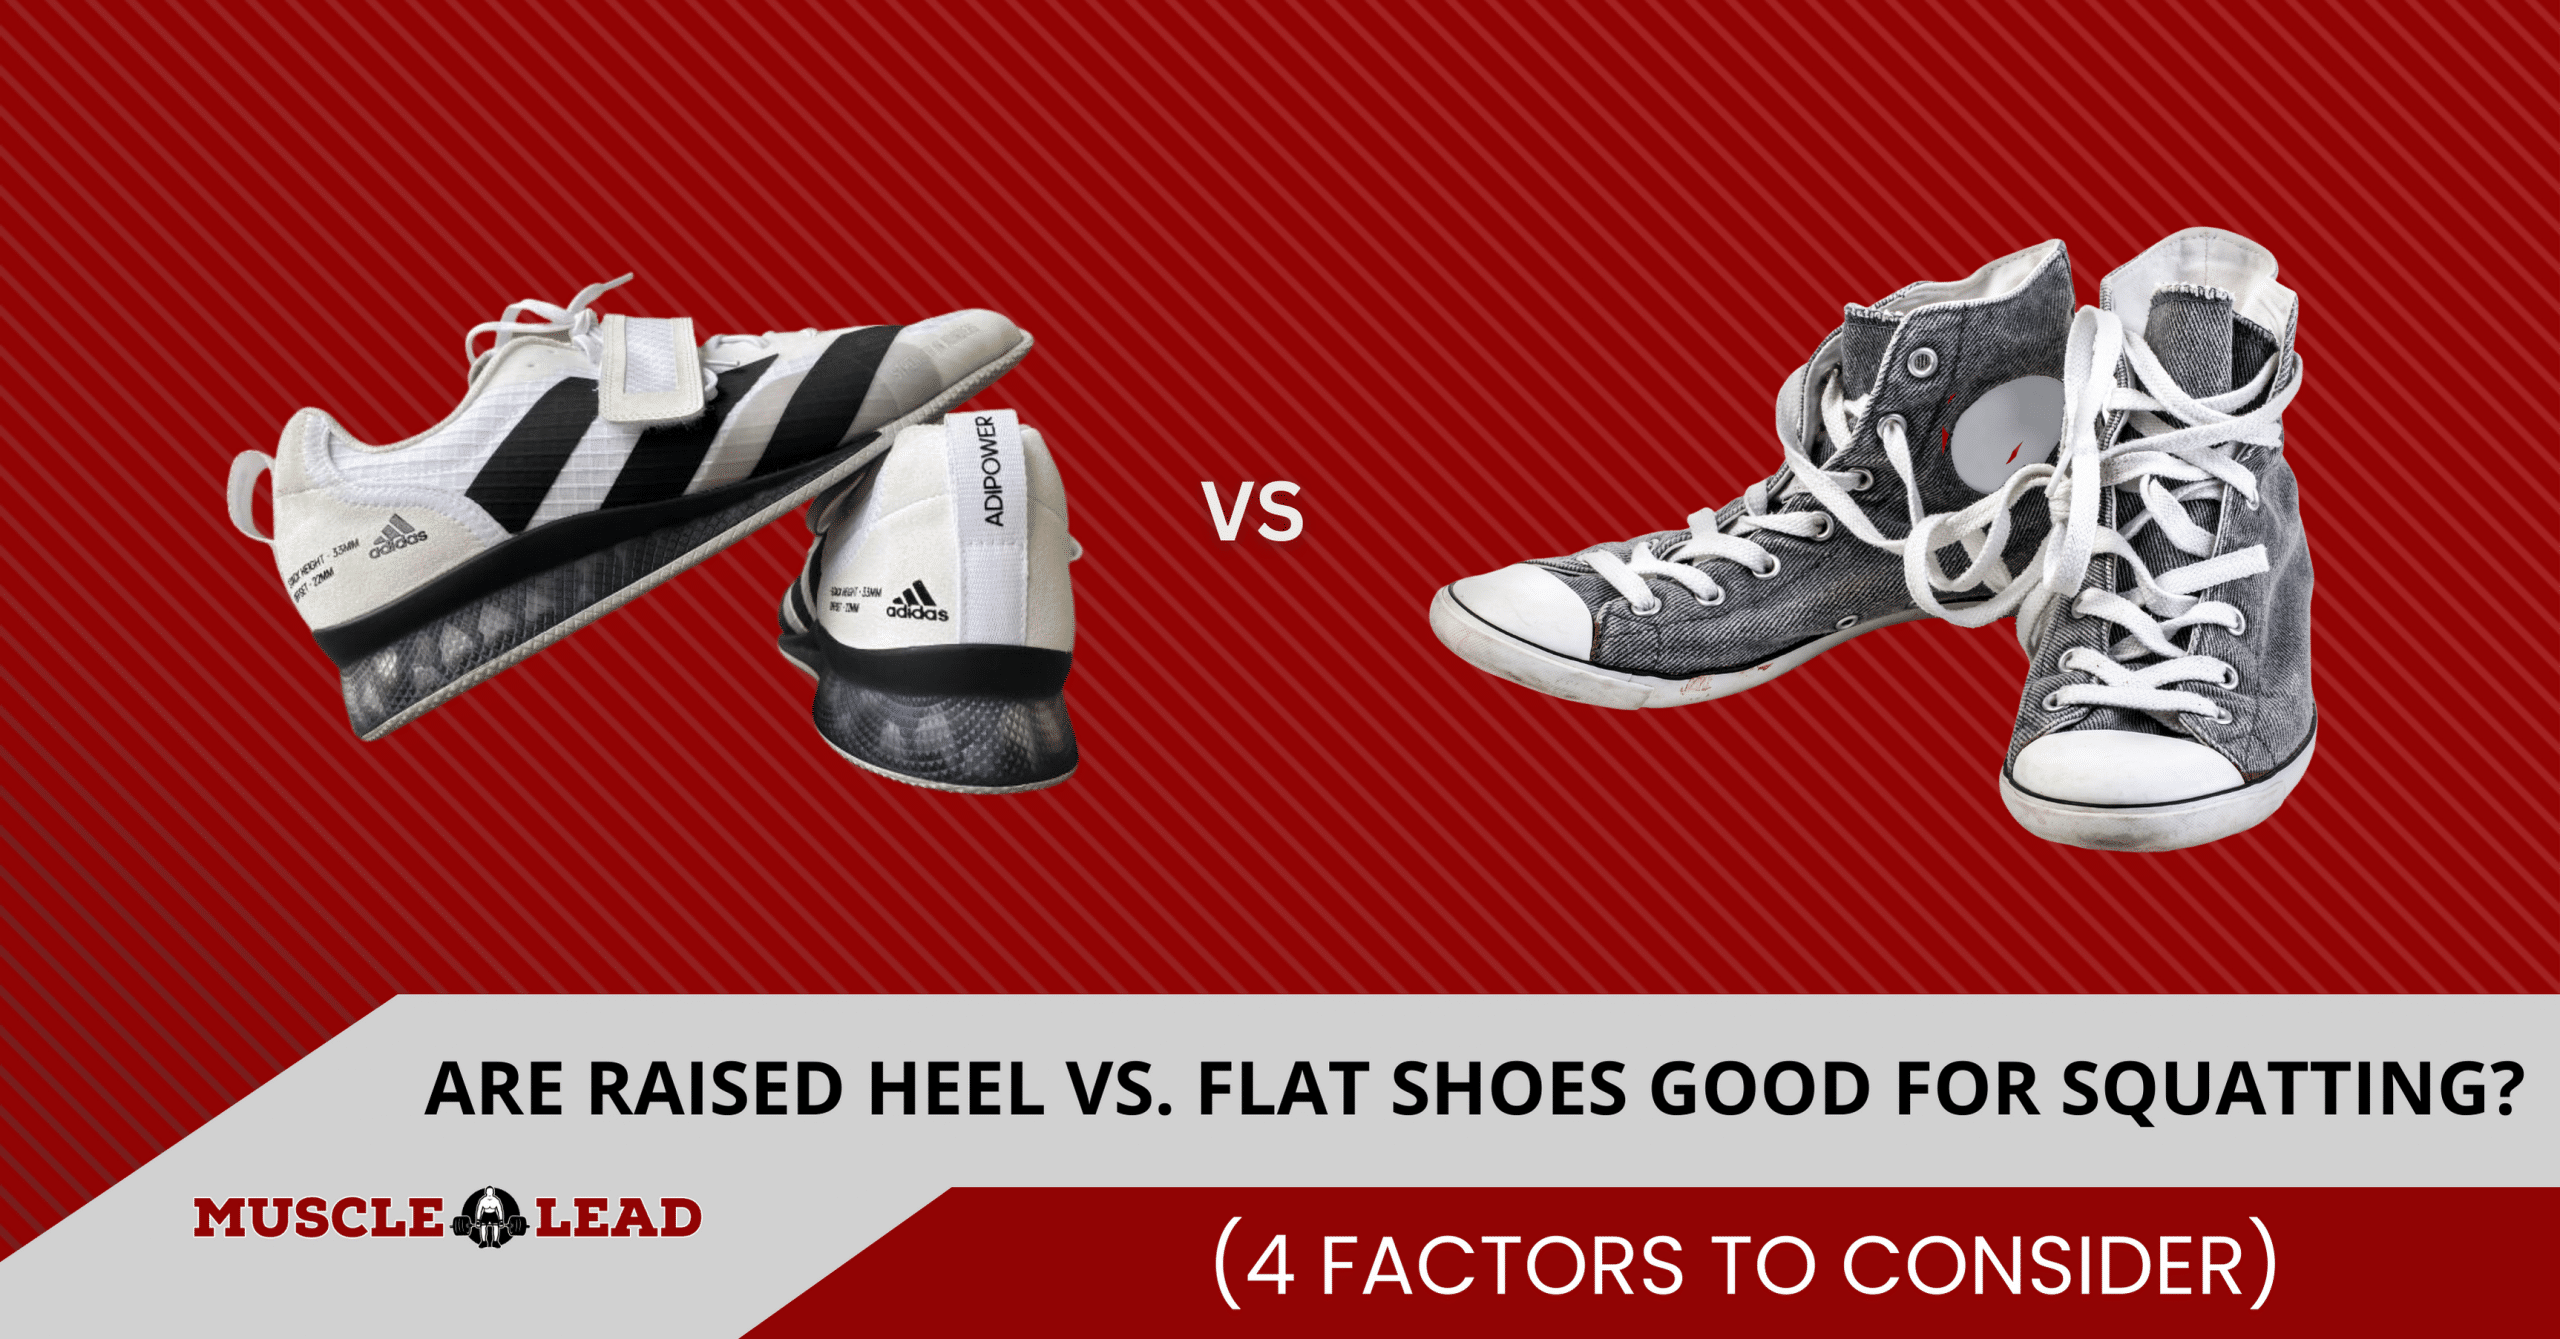 Are Raised Heel vs. Flat Shoes Good For Squatting